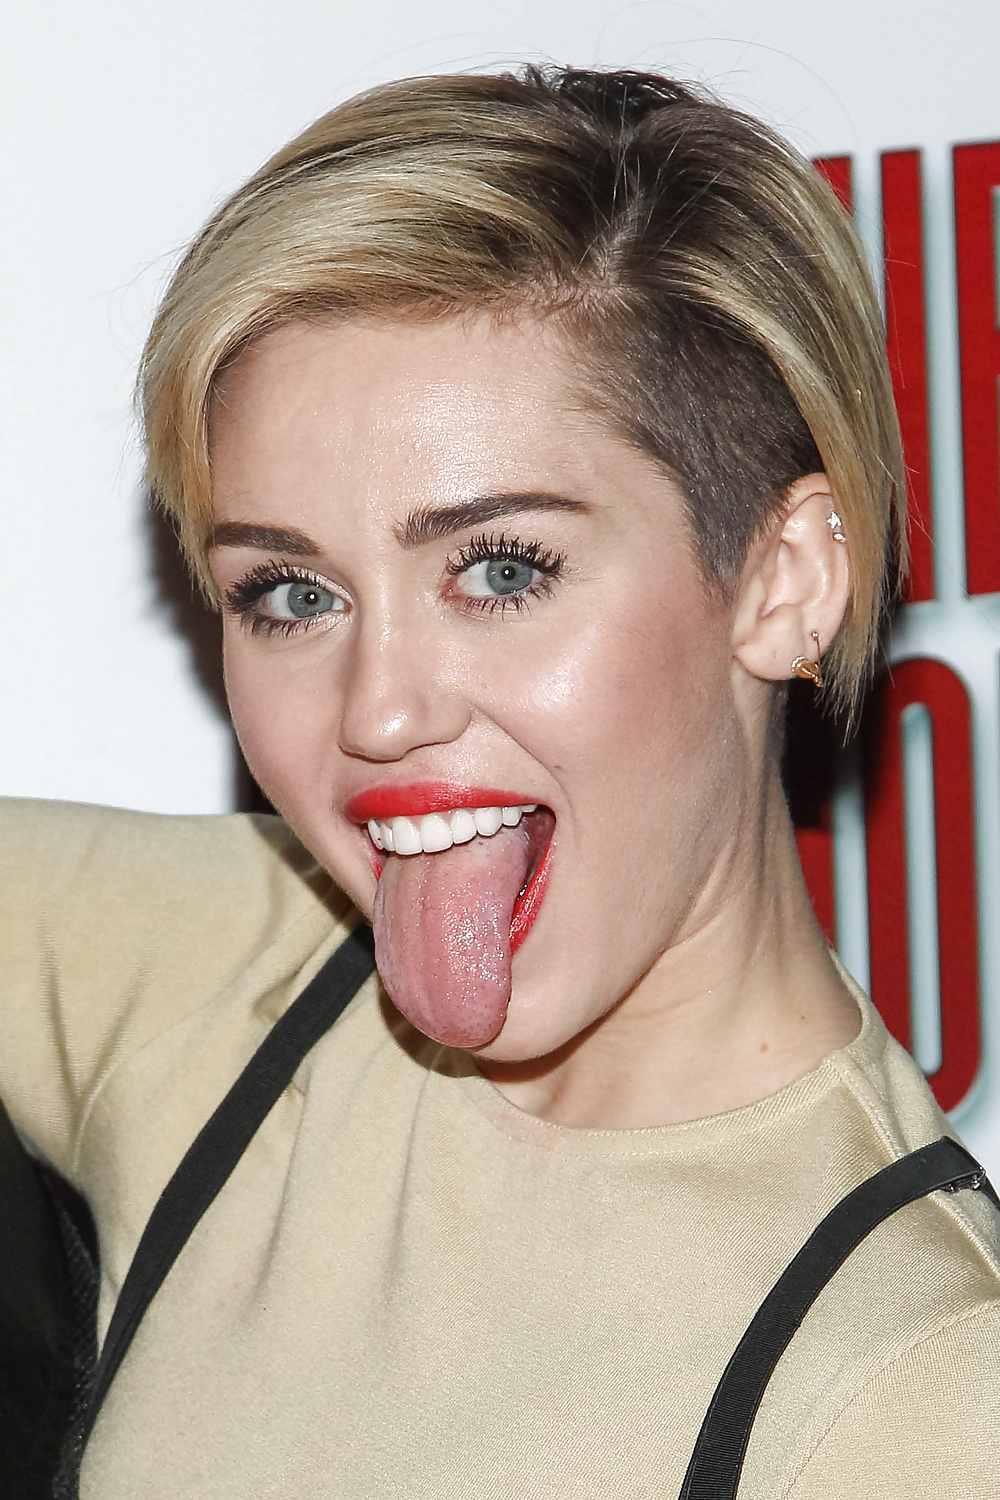 Best Miley Cyrus pics to wank #24652956